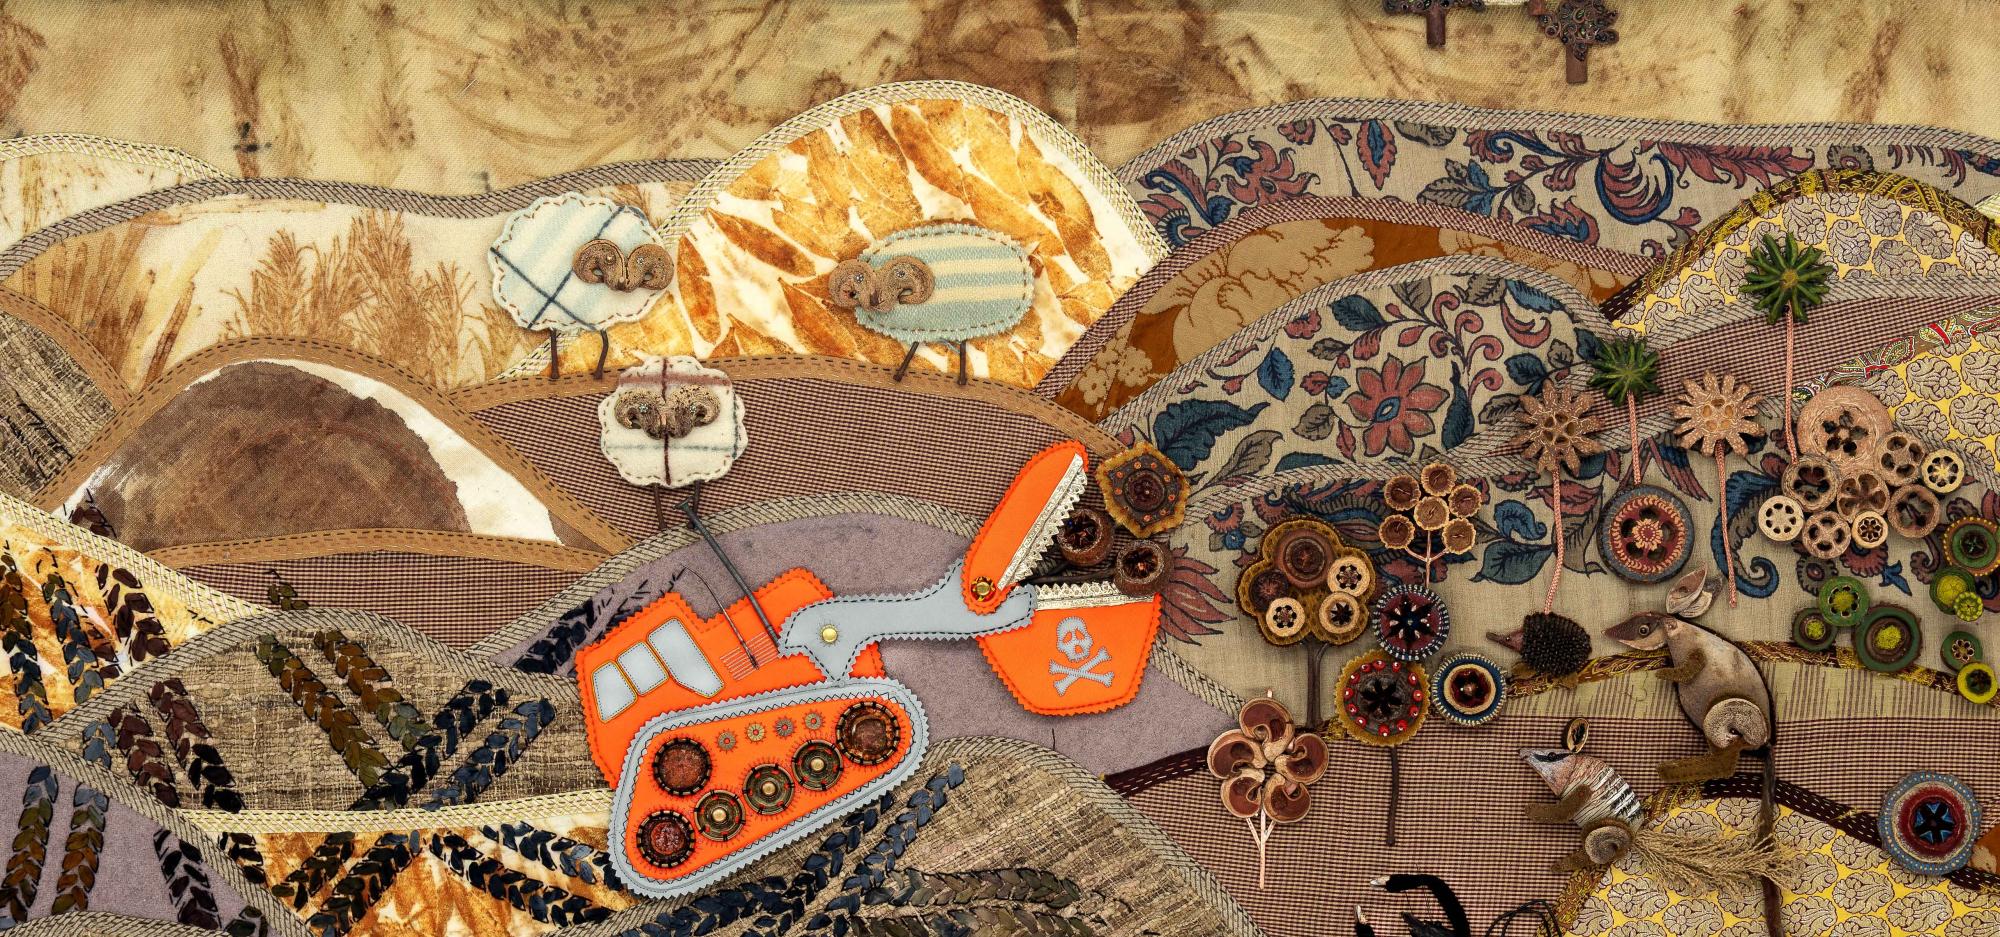 a collage of different material and mediums of a rural country scene with an excavator and sheep in the background